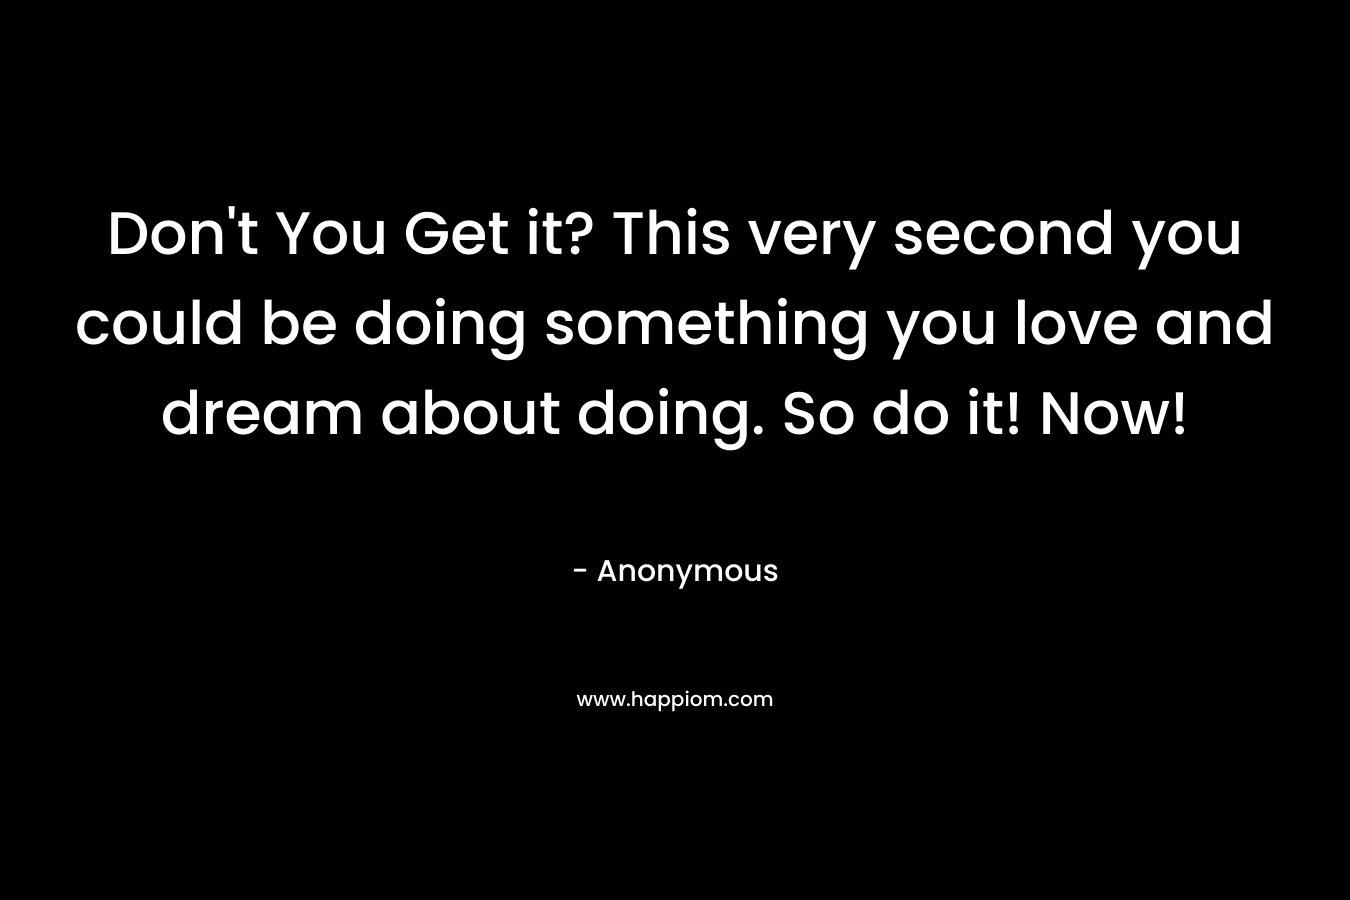 Don't You Get it? This very second you could be doing something you love and dream about doing. So do it! Now!